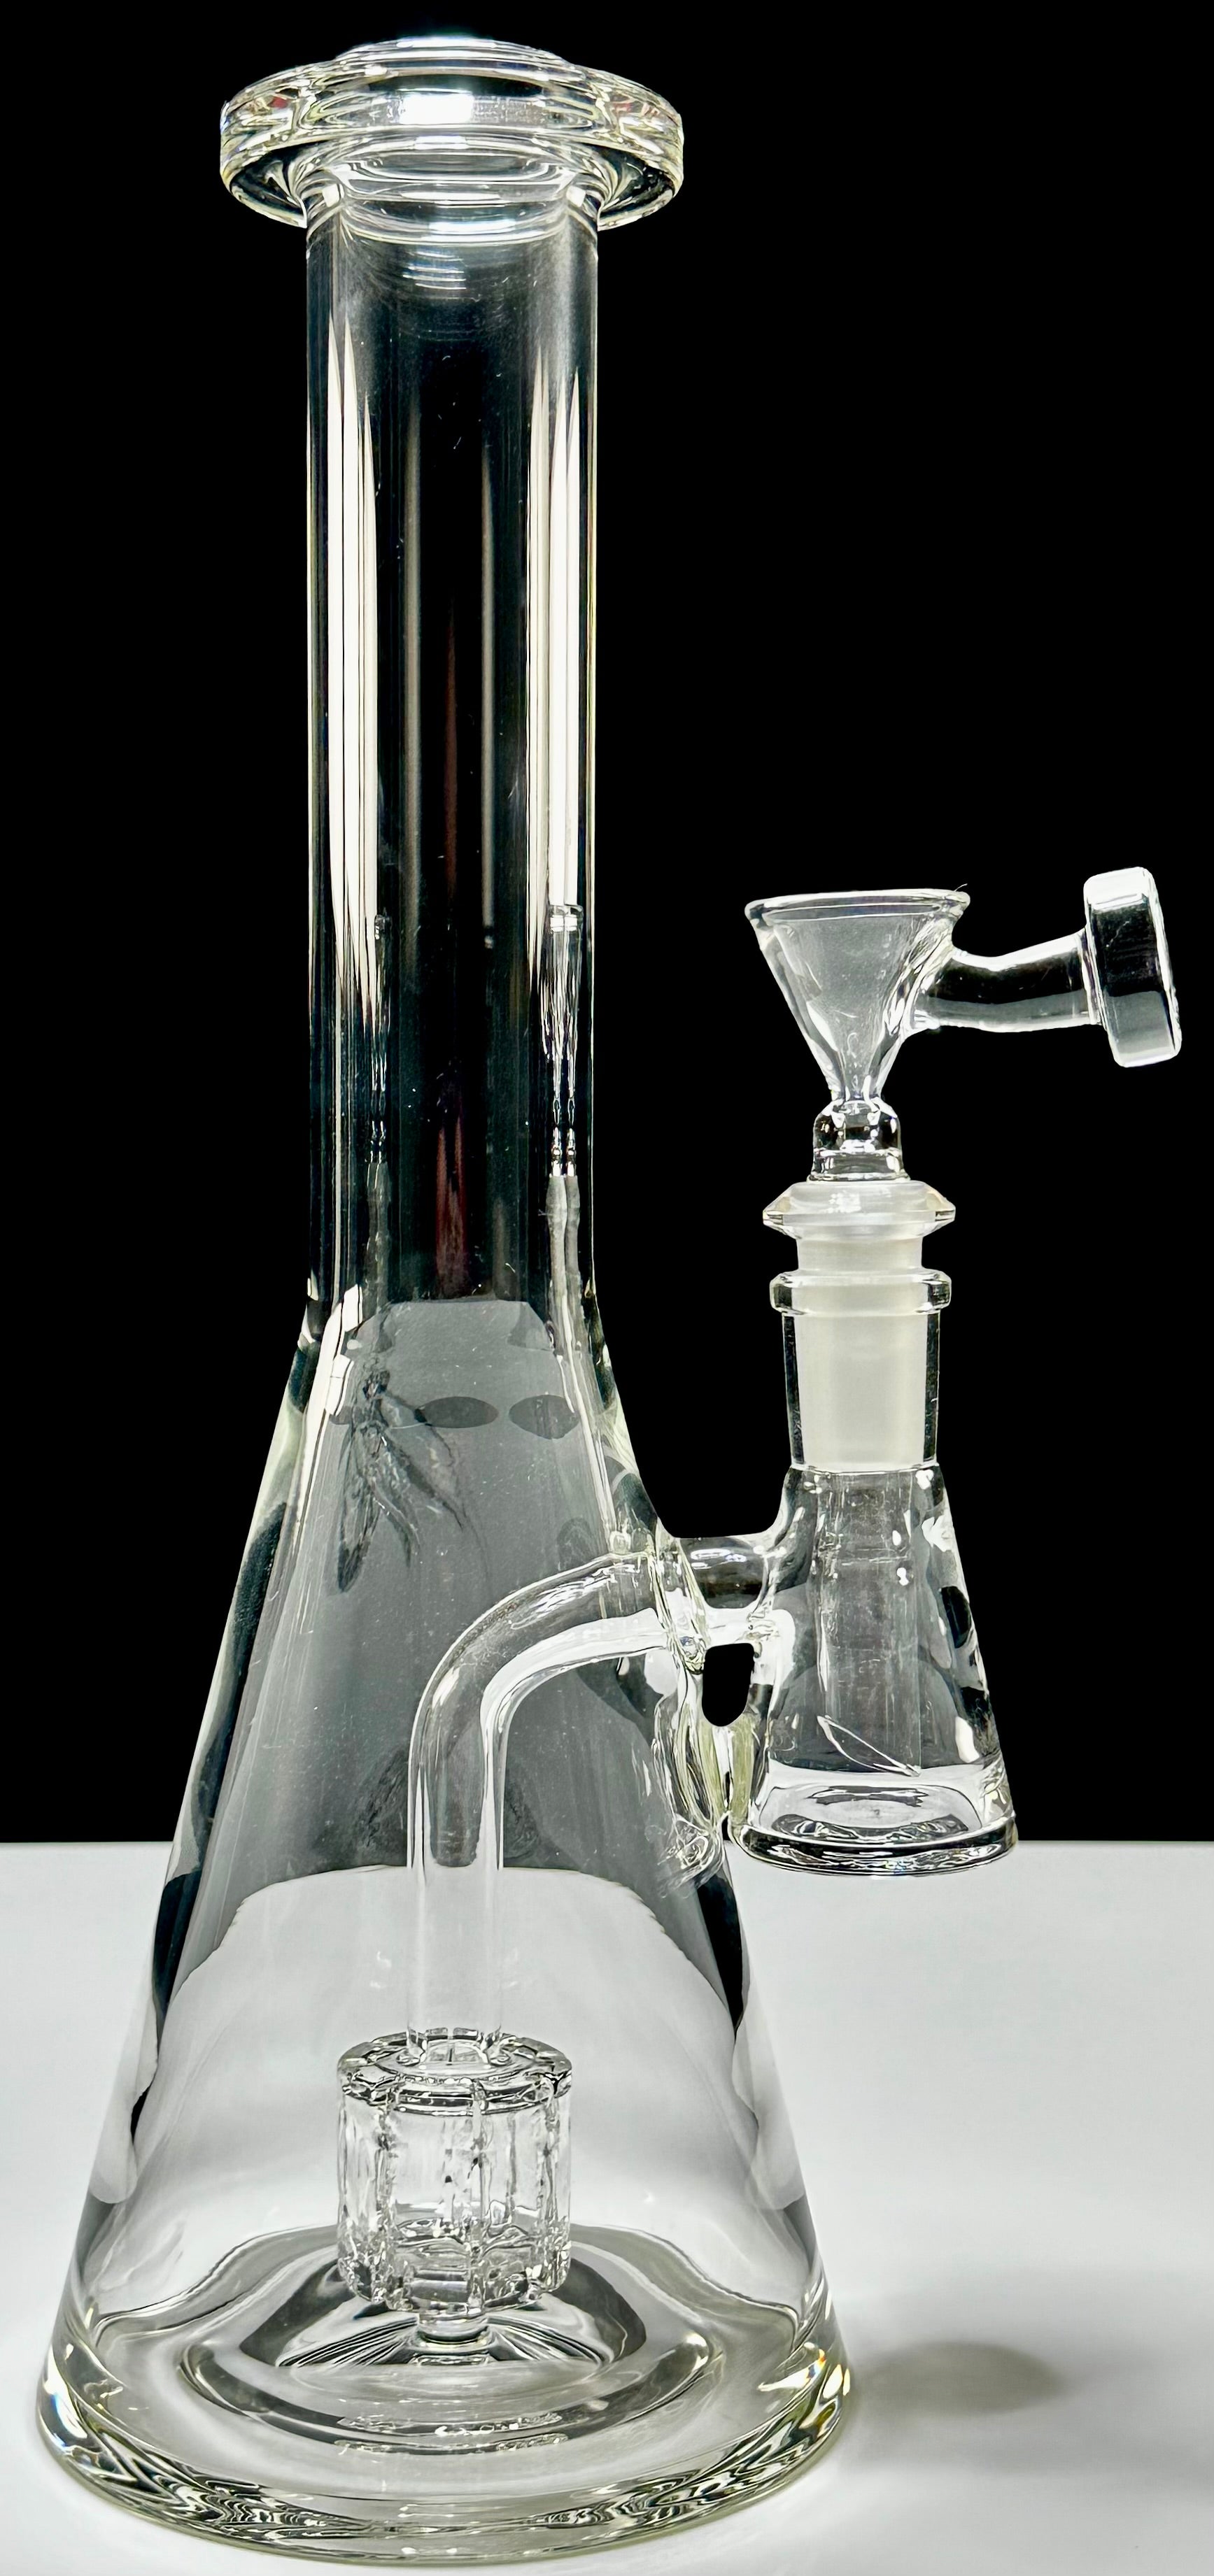 Williams Glass Excalibur 14mm w/ Built-In Dry Catcher